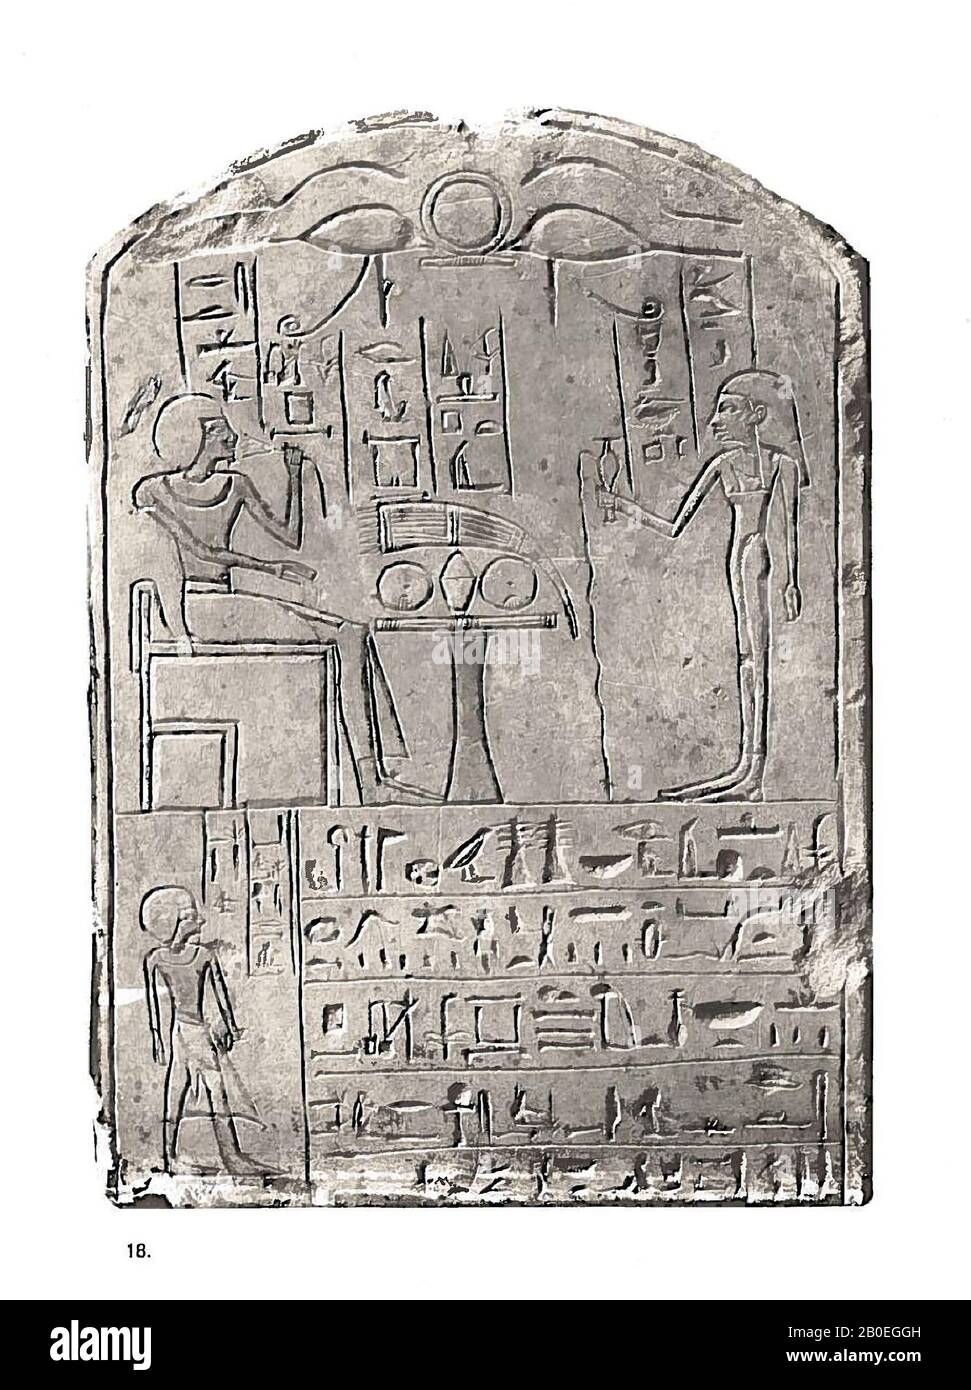 Penserd, round arch, Limestone stele of a king writer named Penserd. In the round arch two Horus eyes with a ring in between. The inscription contains sacrificial formulas for the god Osiris. Penserd is pictured sitting on a chair at an offering table while he smells a lotus flower. For the Egyptians, the lotus was a symbol for regeneration. His wife stands opposite Penserd. She pours out a liquid as an offering, this is called a libation. On the bottom left is Seni pictured, the brother of Penserd. He has founded this stela for Penserd, of course he shows himself on the stela. So he also Stock Photo